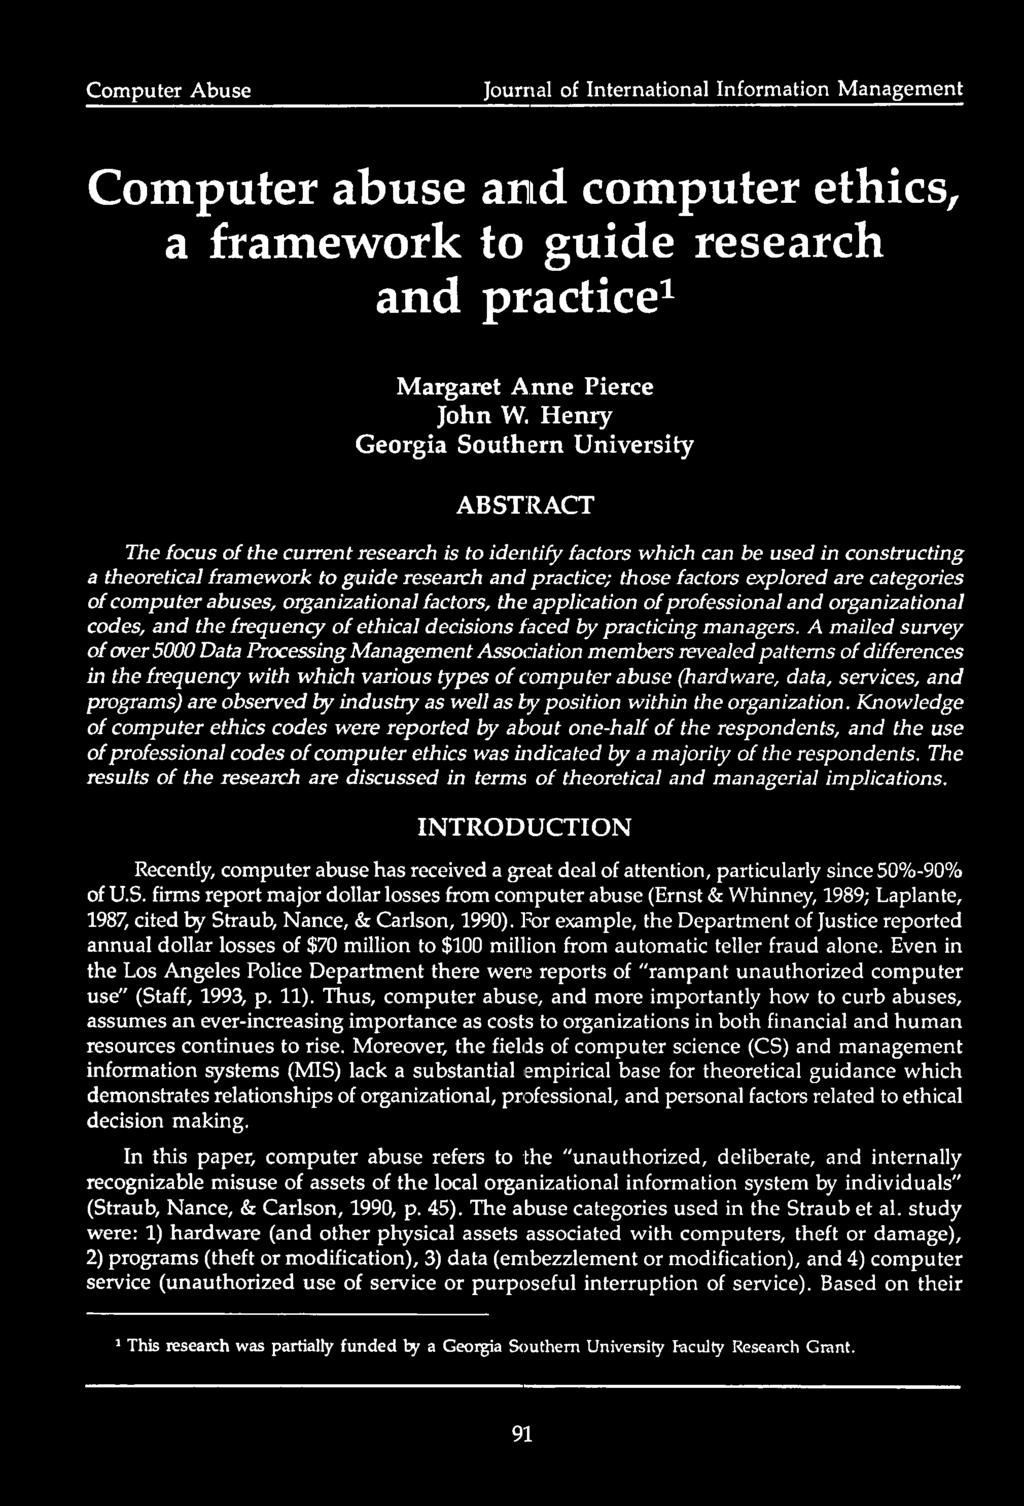 Heniy Georgia Southern University ABSTRACT The focus of the current research is to identify factors which can be used in constructing a theoretical framework to guide research and practice; those